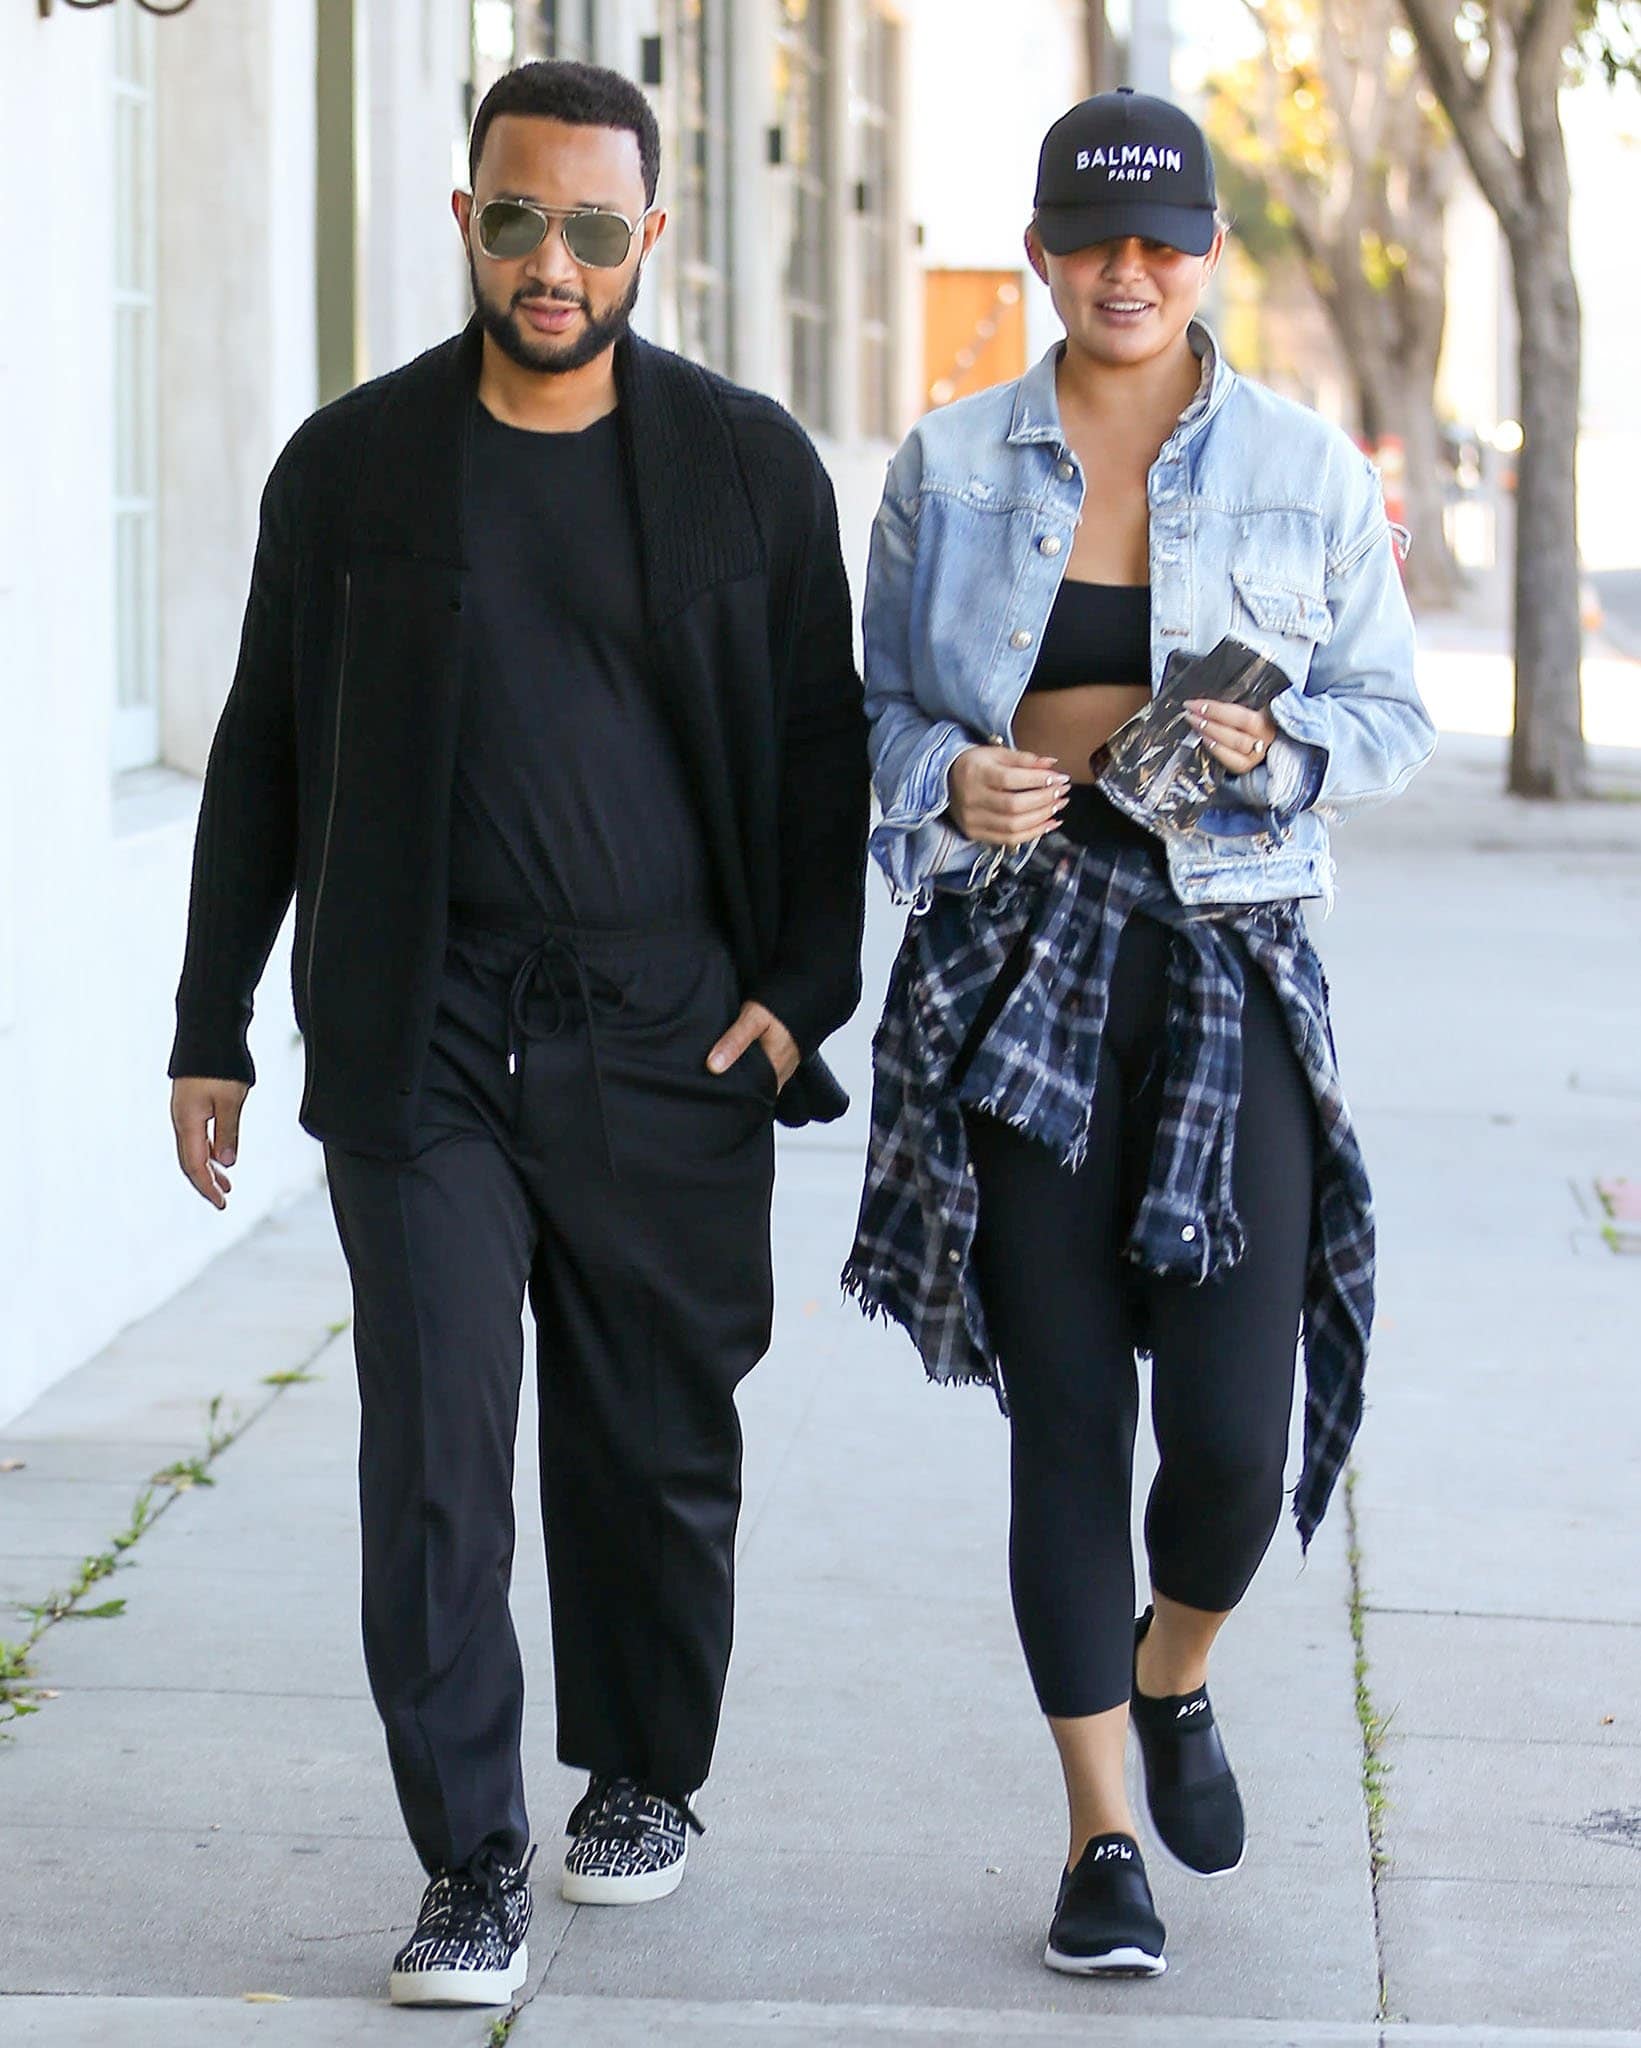 John Legend and Chrissy Teigen out and about in Beverly Hills on January 11, 2022